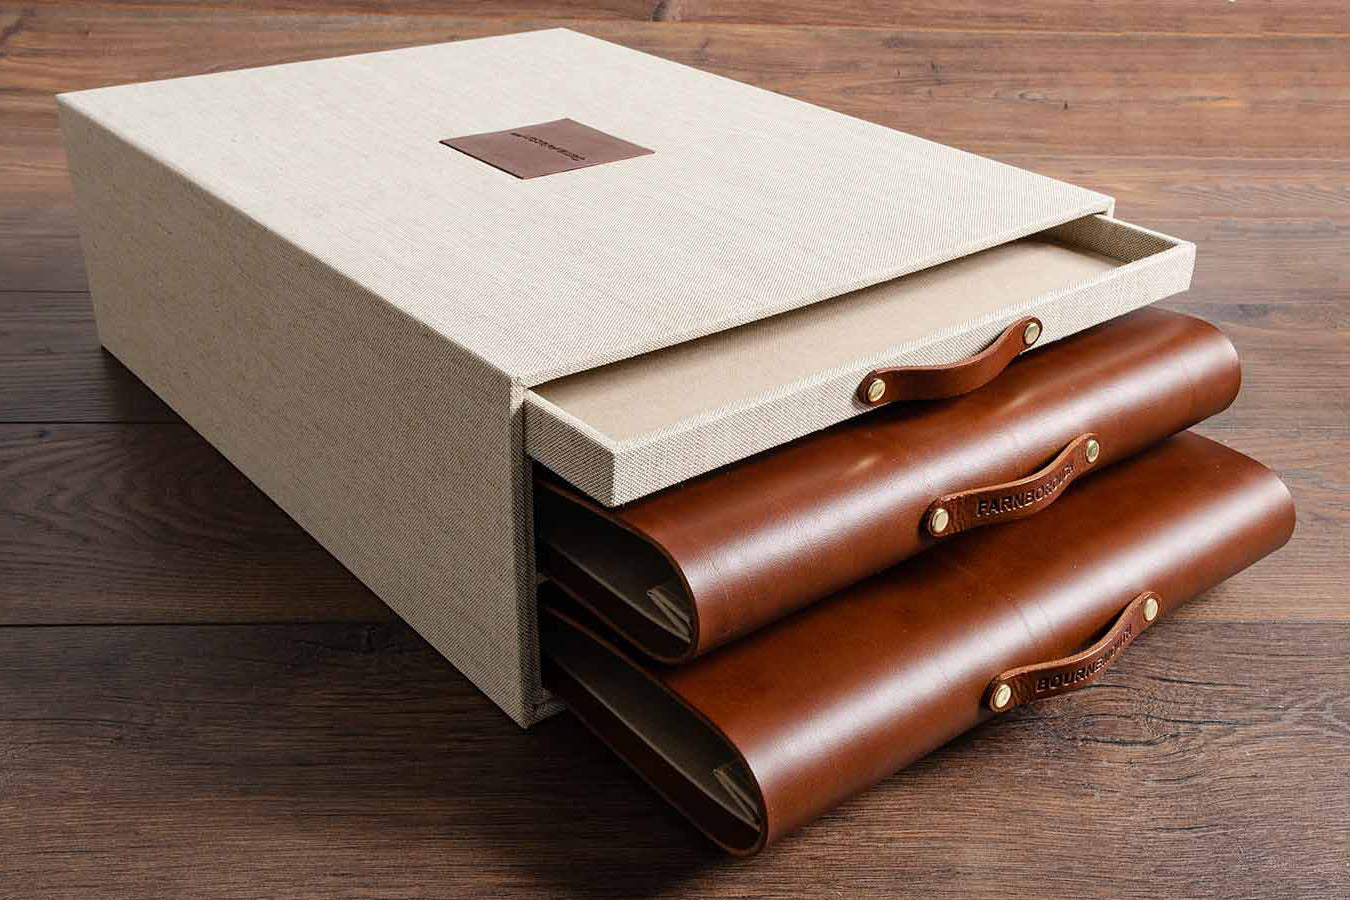 Bespoke presentation box and binders. Product is triple slipcase with drawer, leather name plaque on top and two leather screw post presentation binders with personalised leather pulls